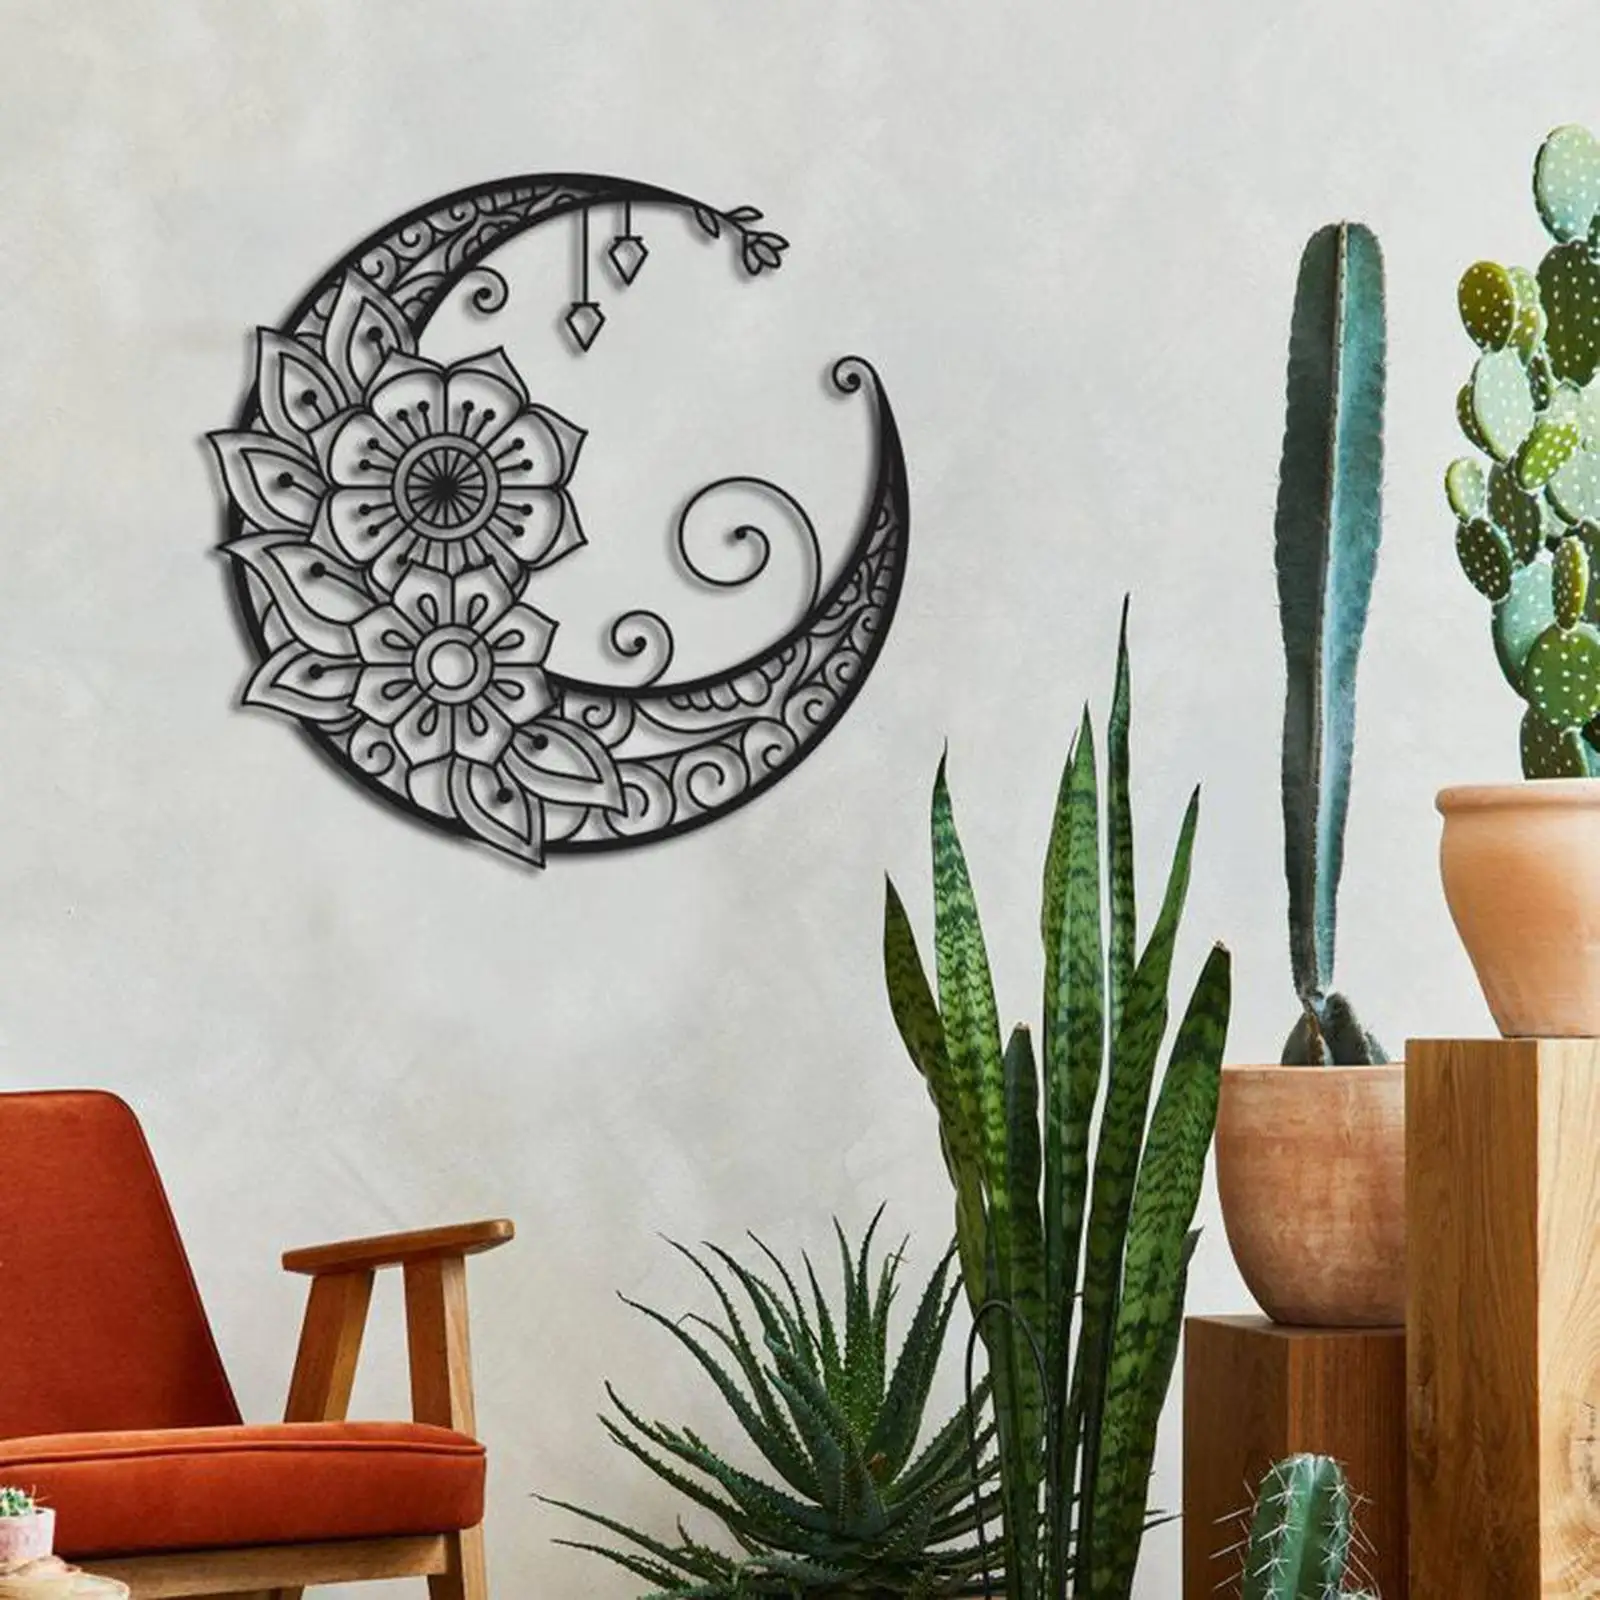 Flower Moon Wall Decor Artistic Hanging Wall Sculpture Ornament for Garden Yard Office Bedroom Patio